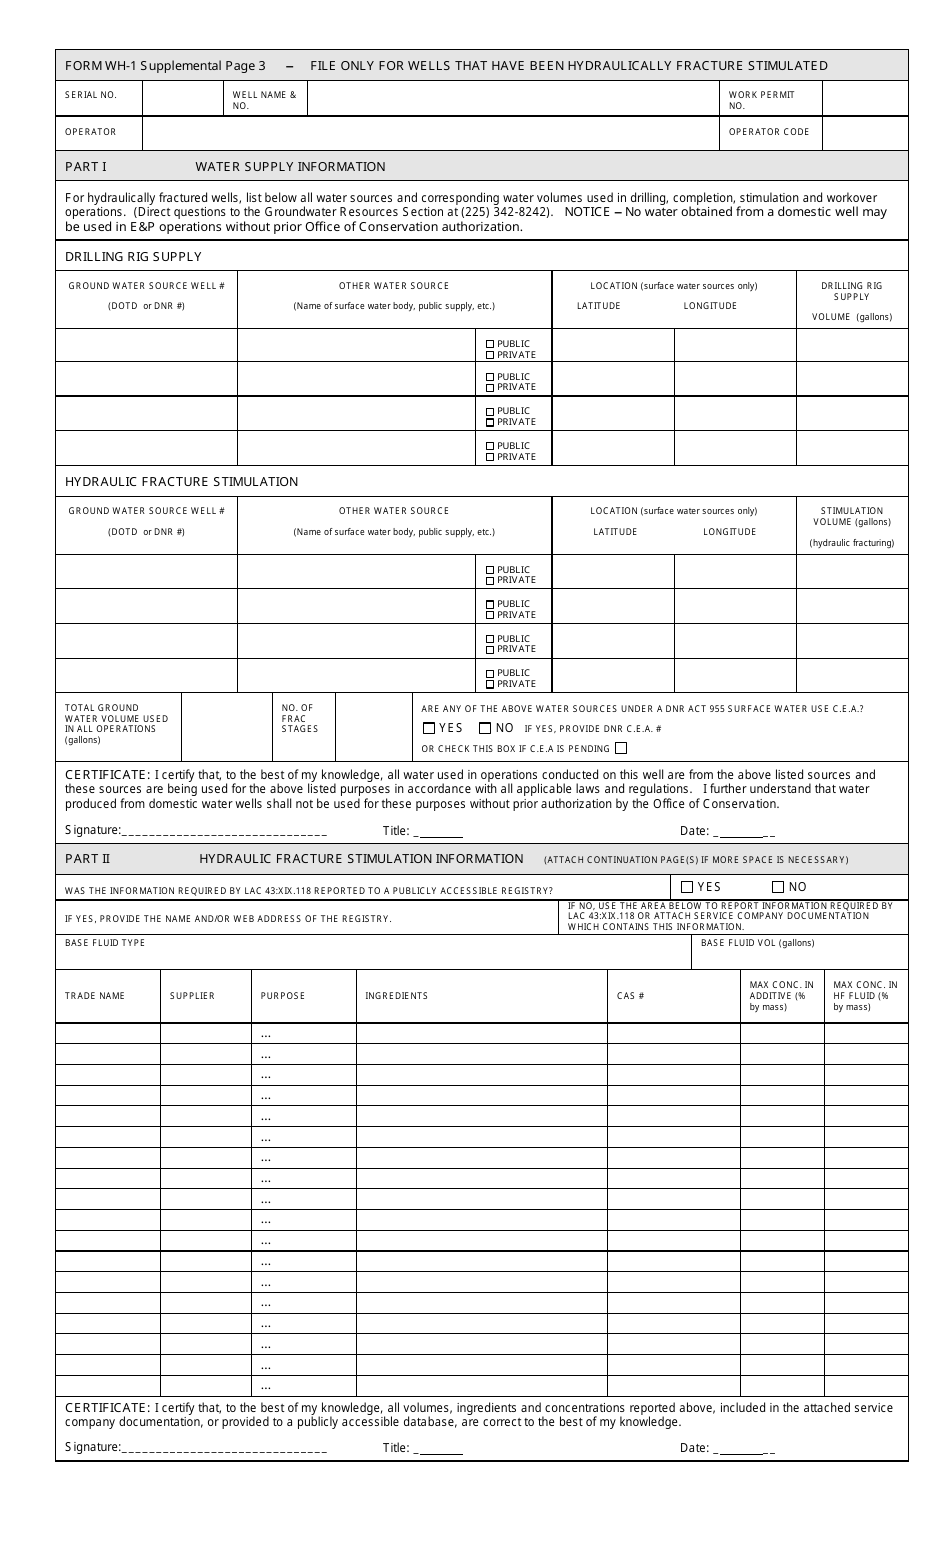 Form WH-1 Supplement 3 Well History and Work Resume Report - Louisiana, Page 1